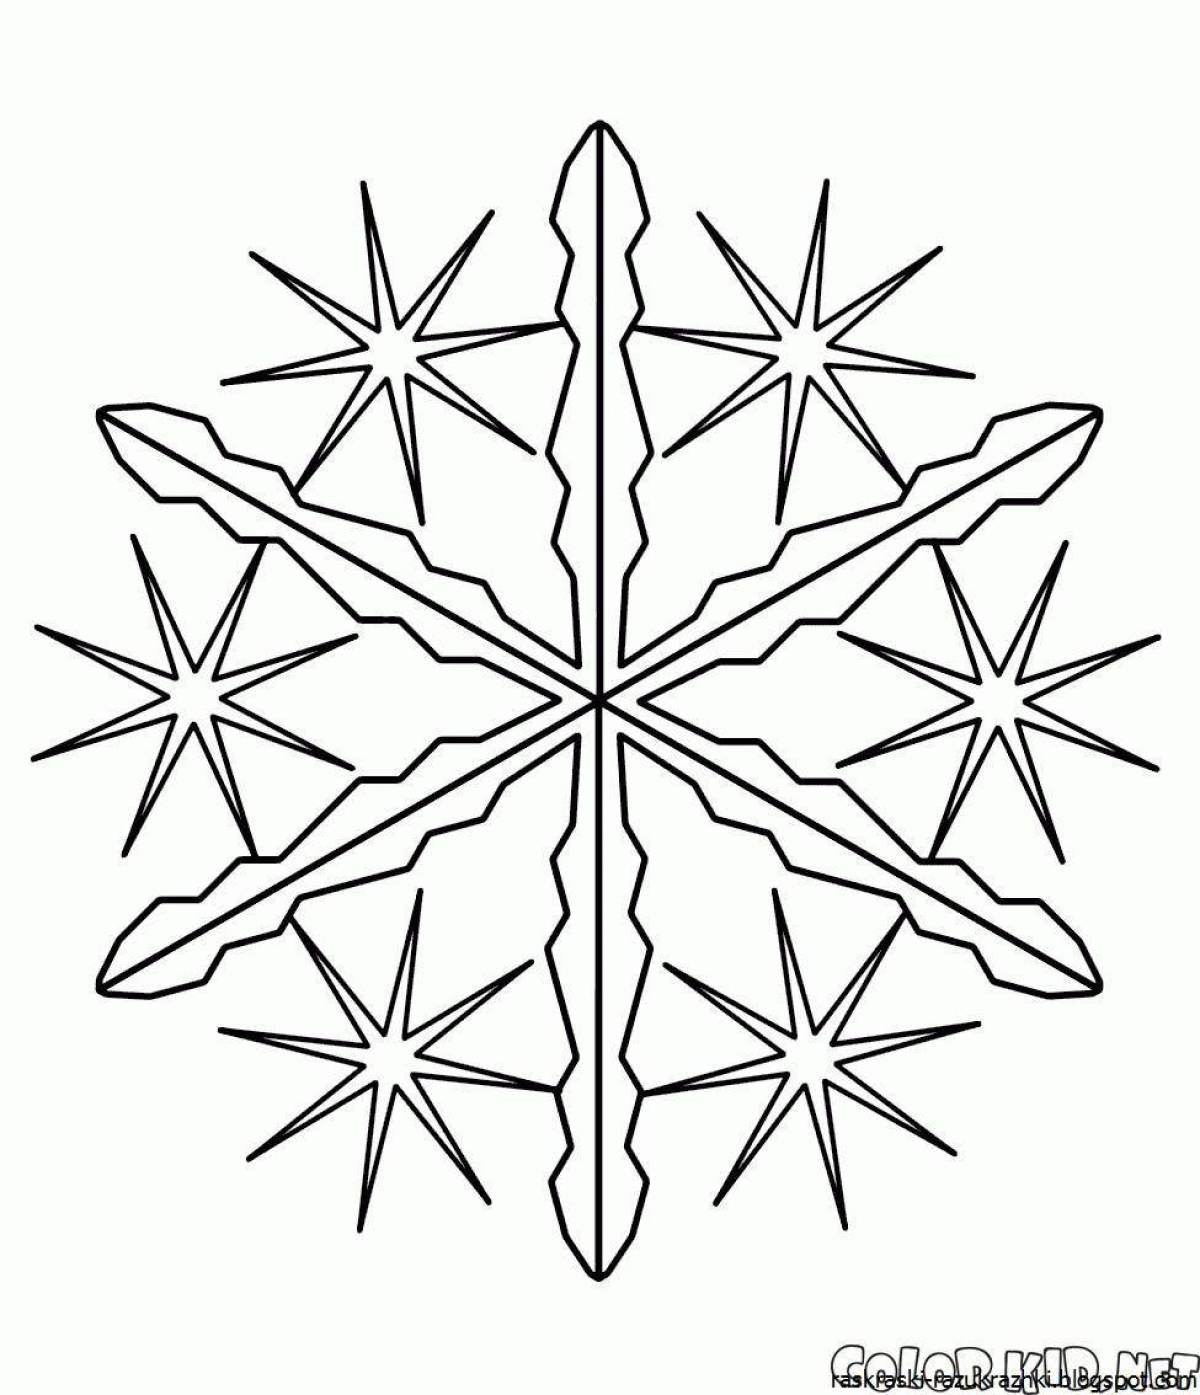 Luminous snowflake coloring book for children 5-6 years old